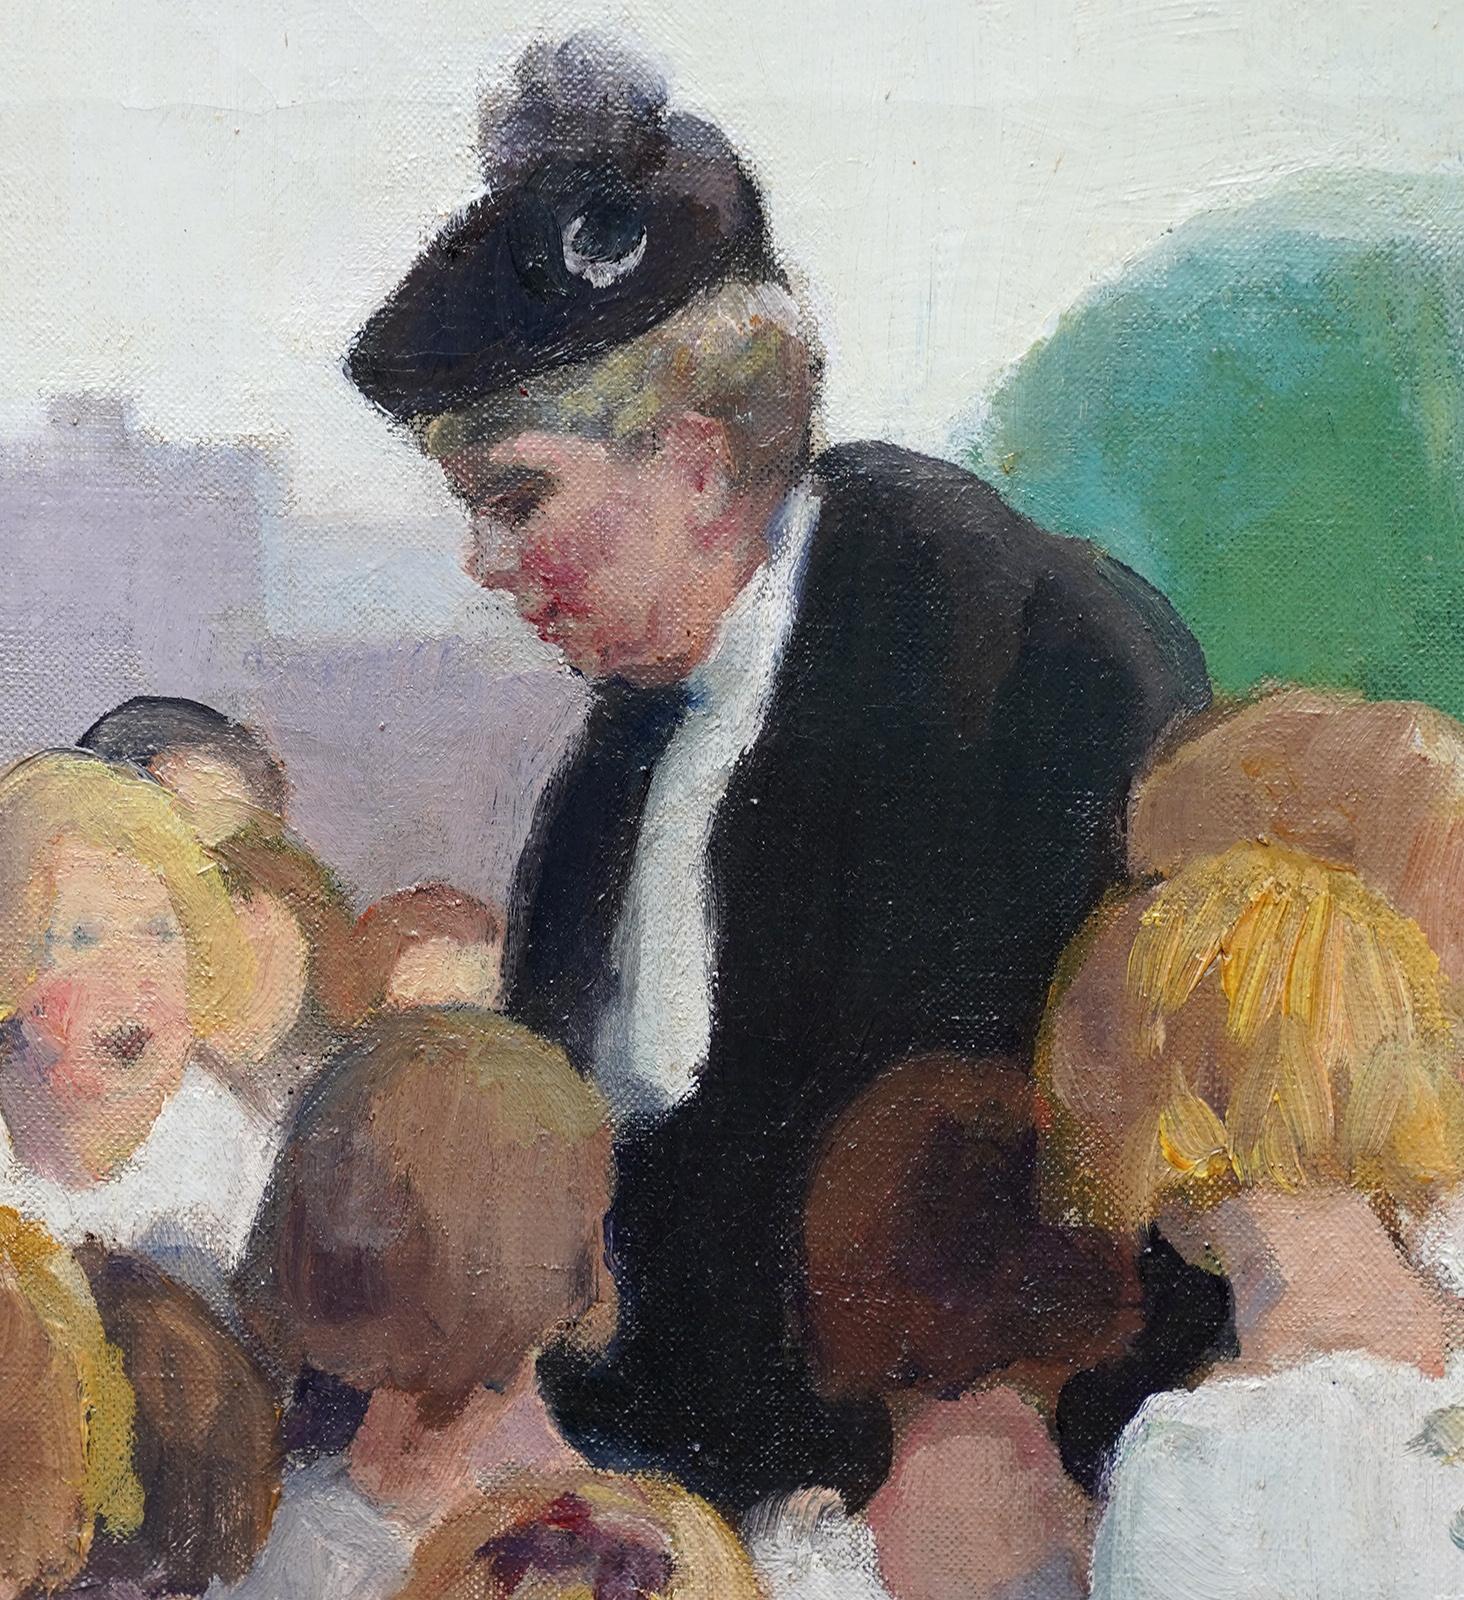 Queen Mary Greeting School Children - British 1910 royalty portrait oil painting - Post-Impressionist Painting by Spencer Pryse